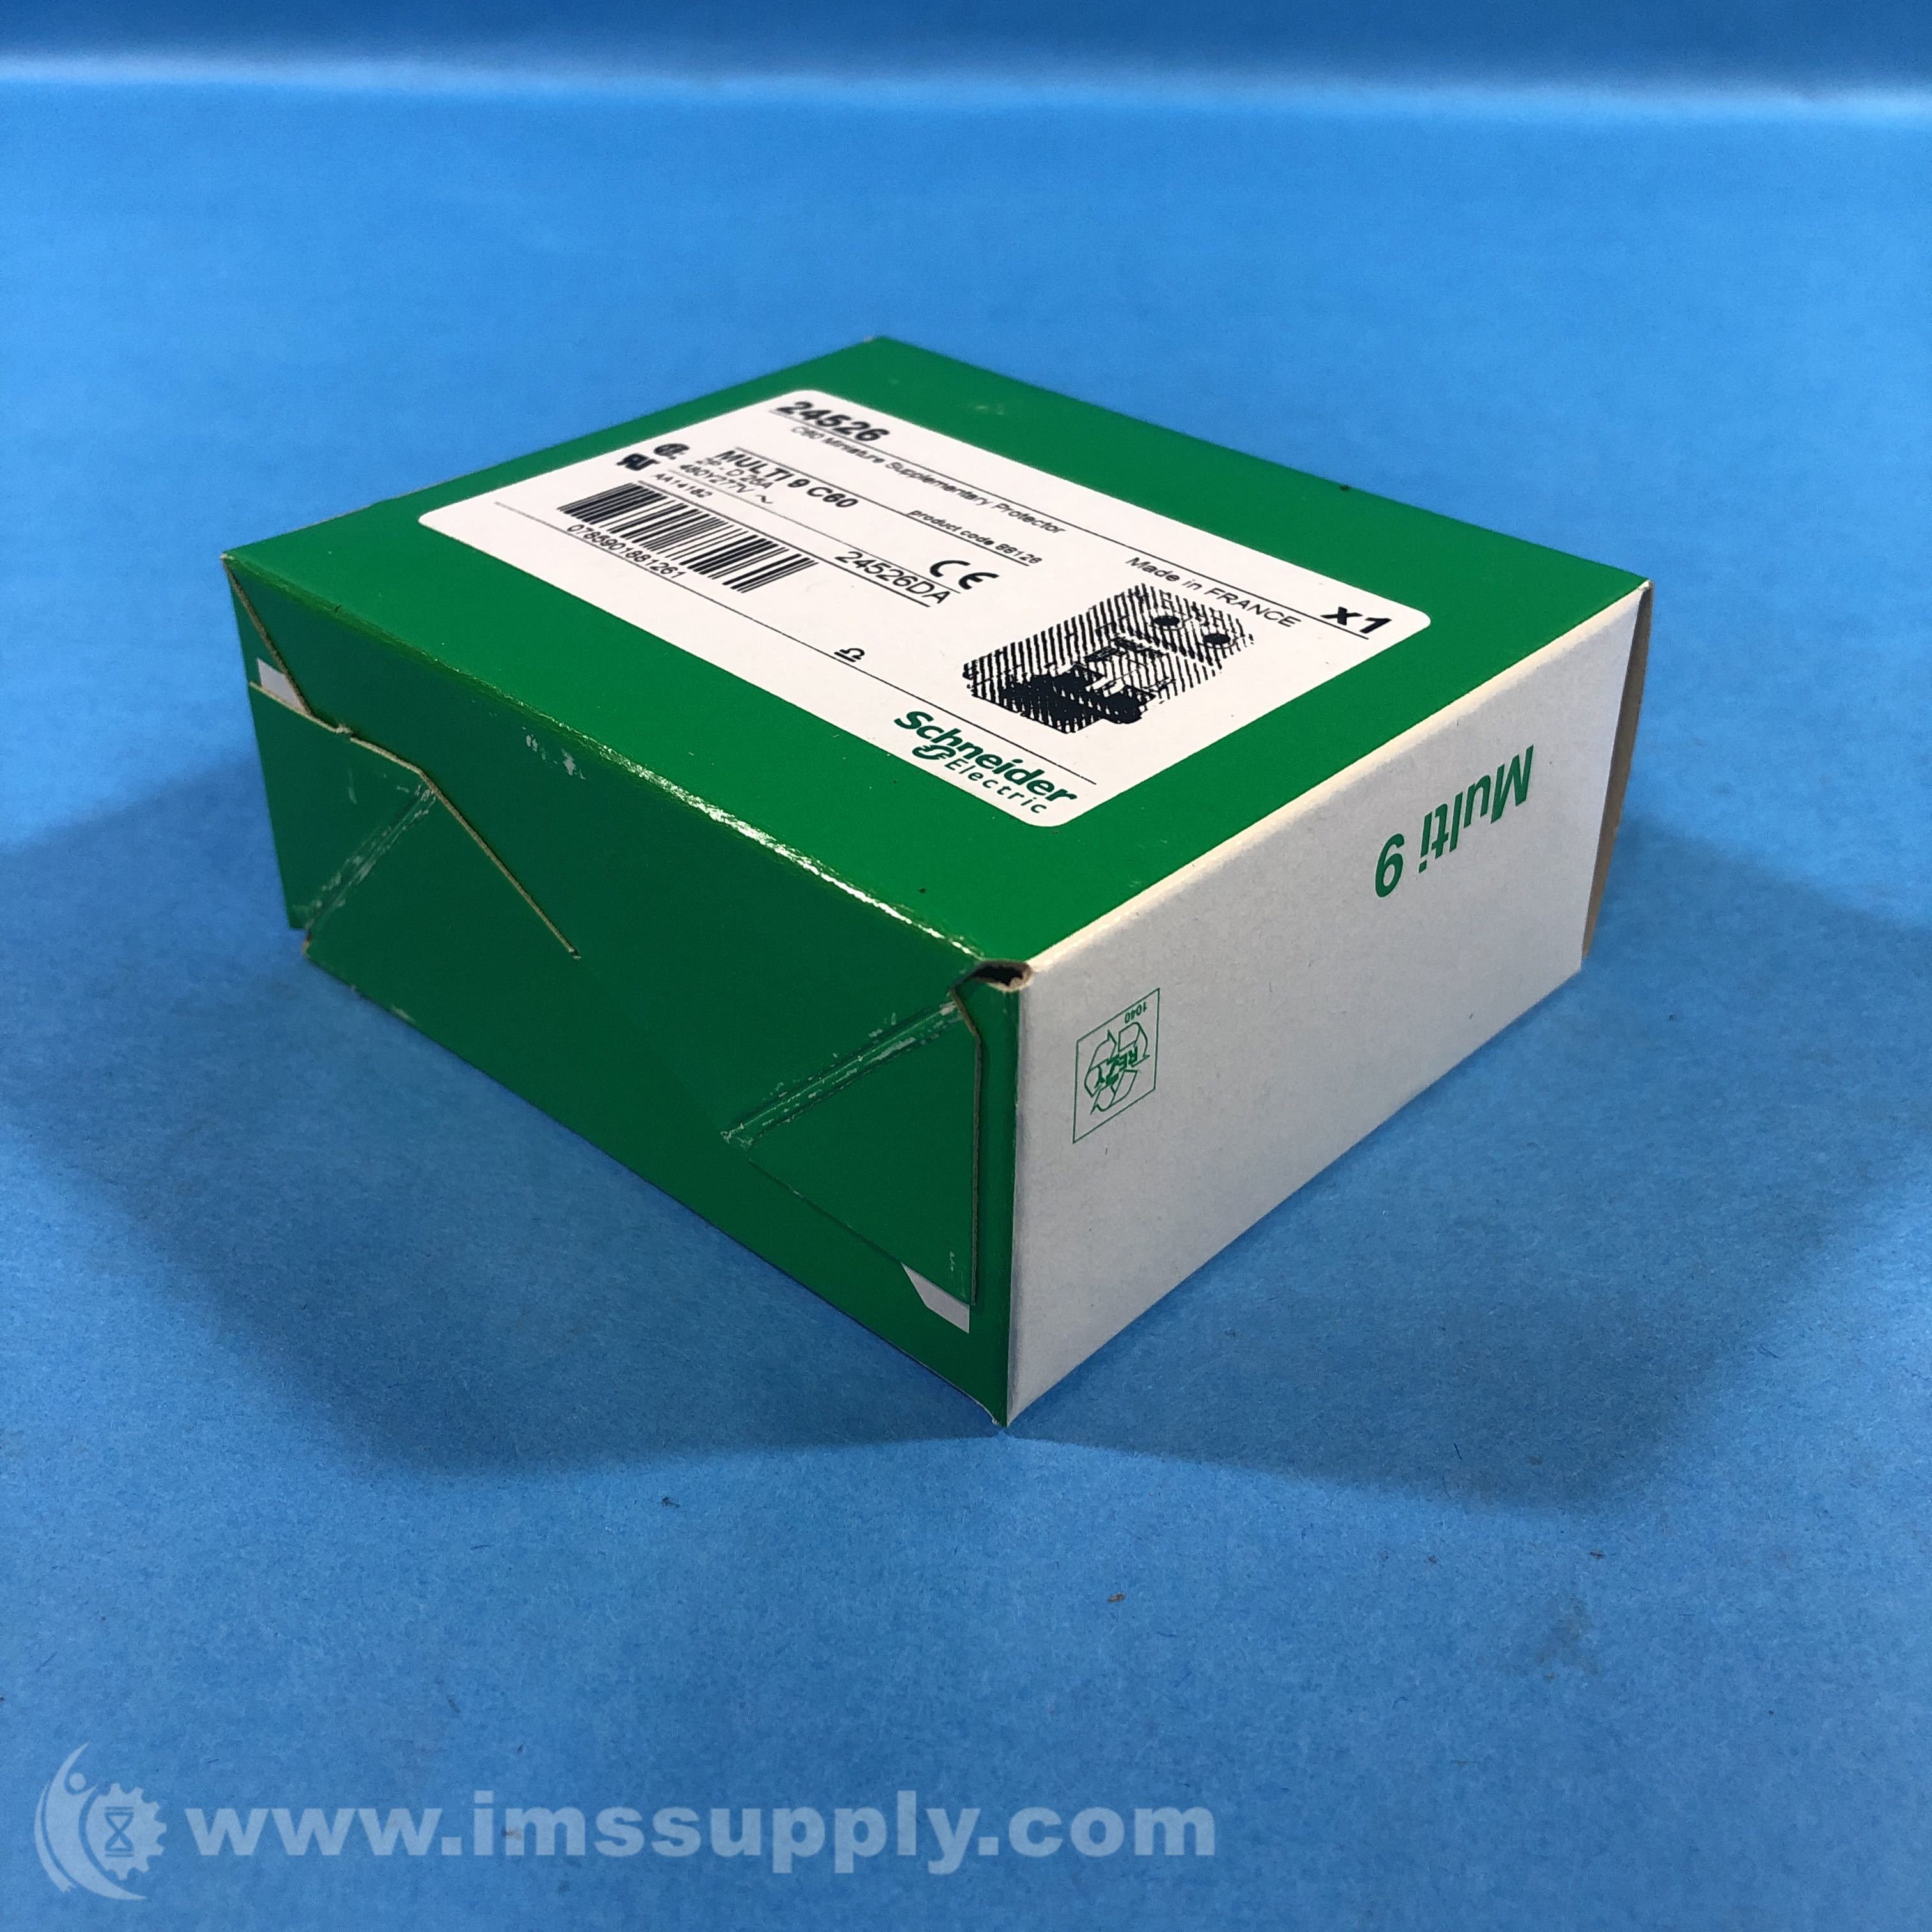 Schneider Electric 24526 Miniature Supplementary Protector C60 IMS Supply